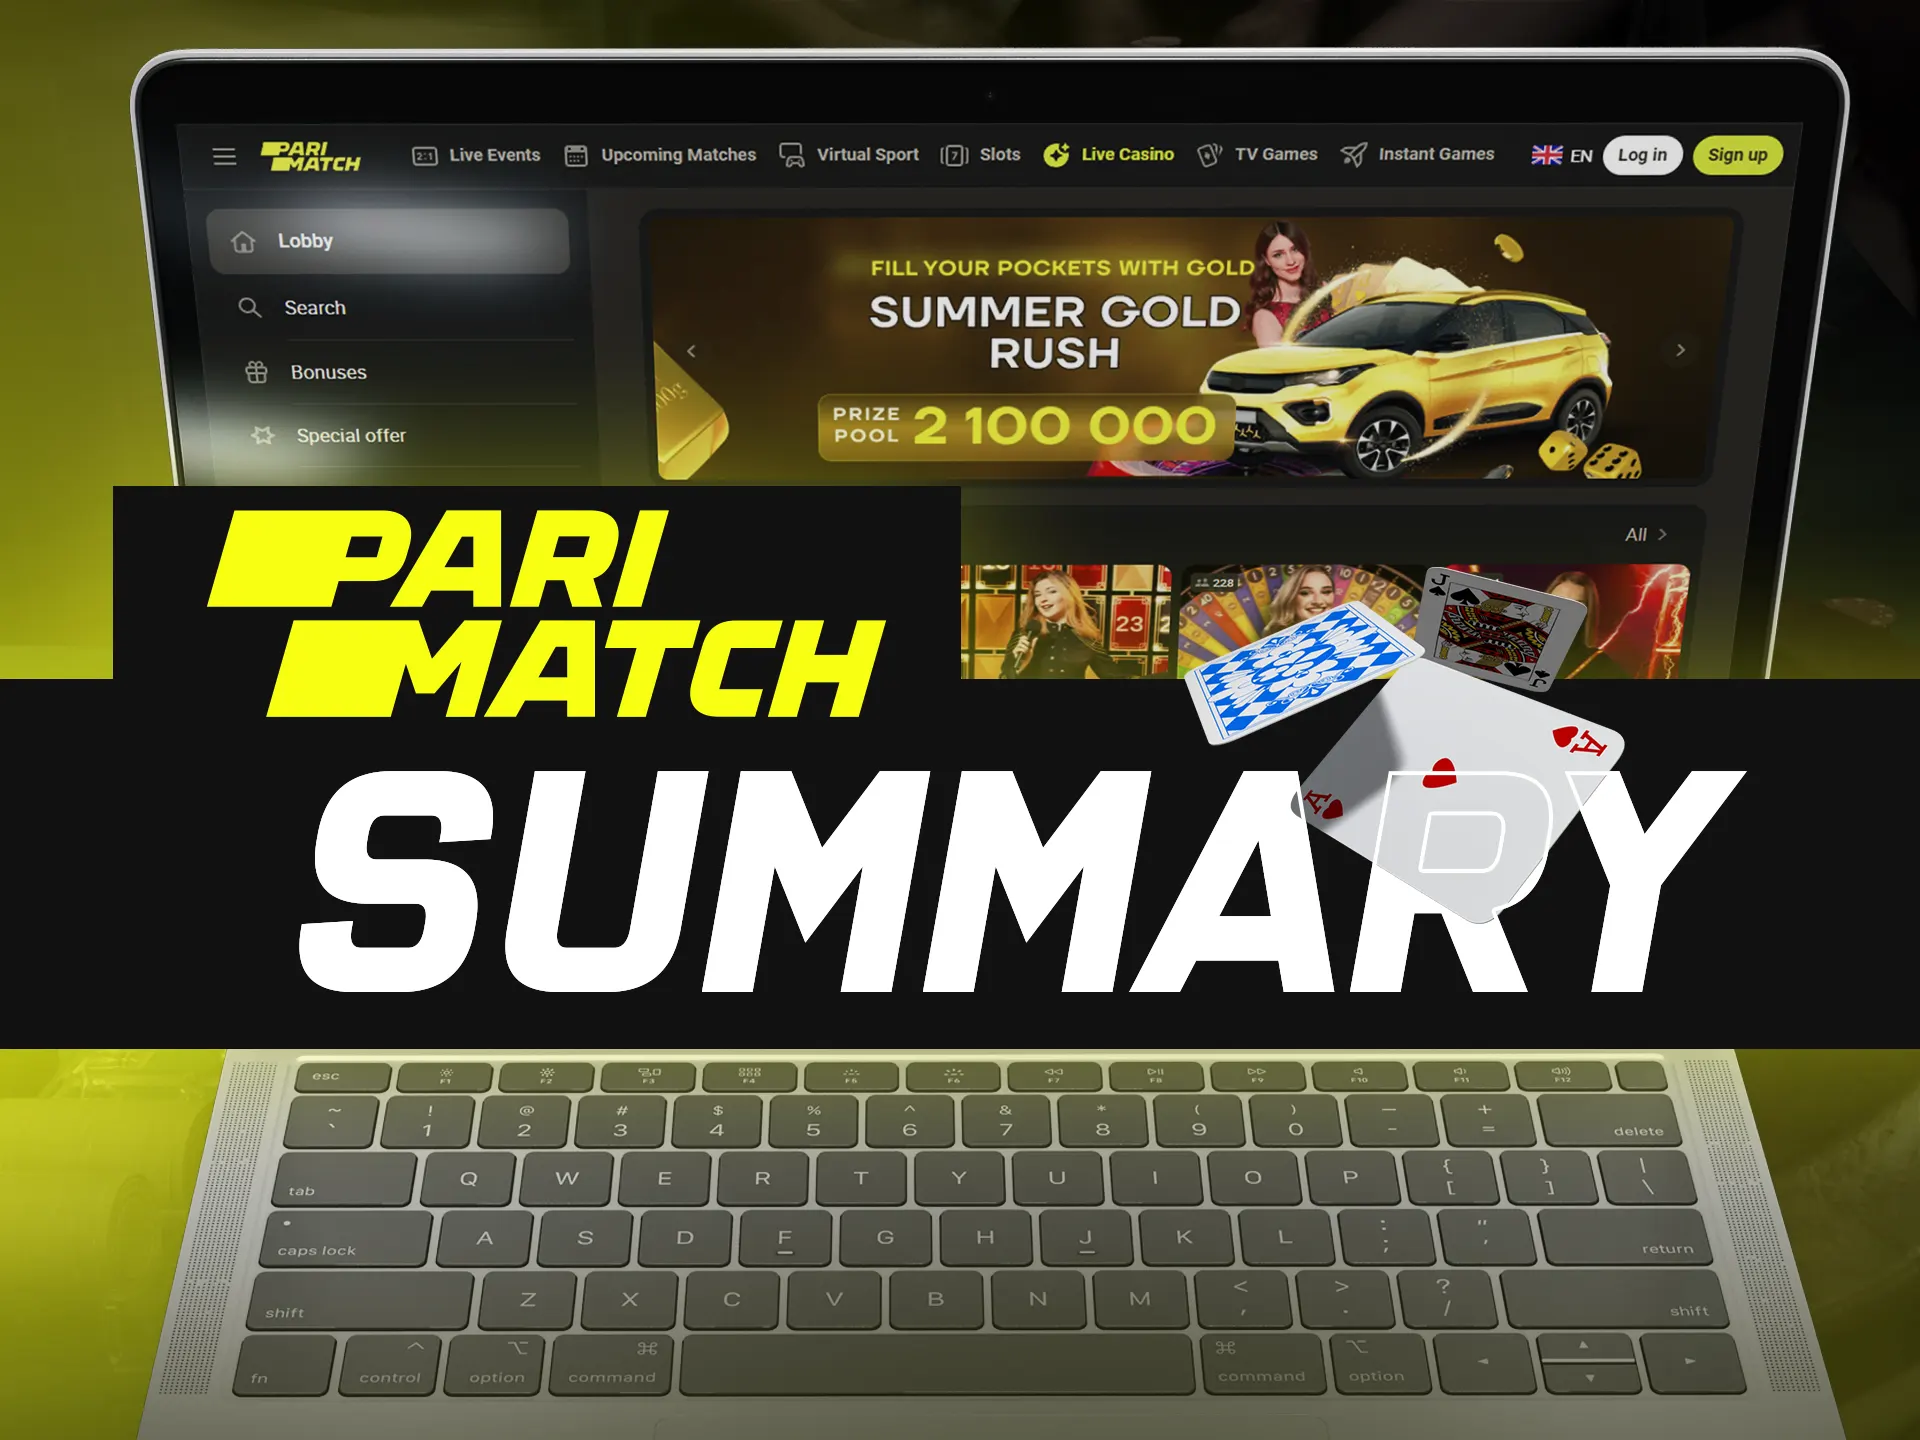 Parimatch Casino offers intriguing prizes and rewards to both new and existing players.